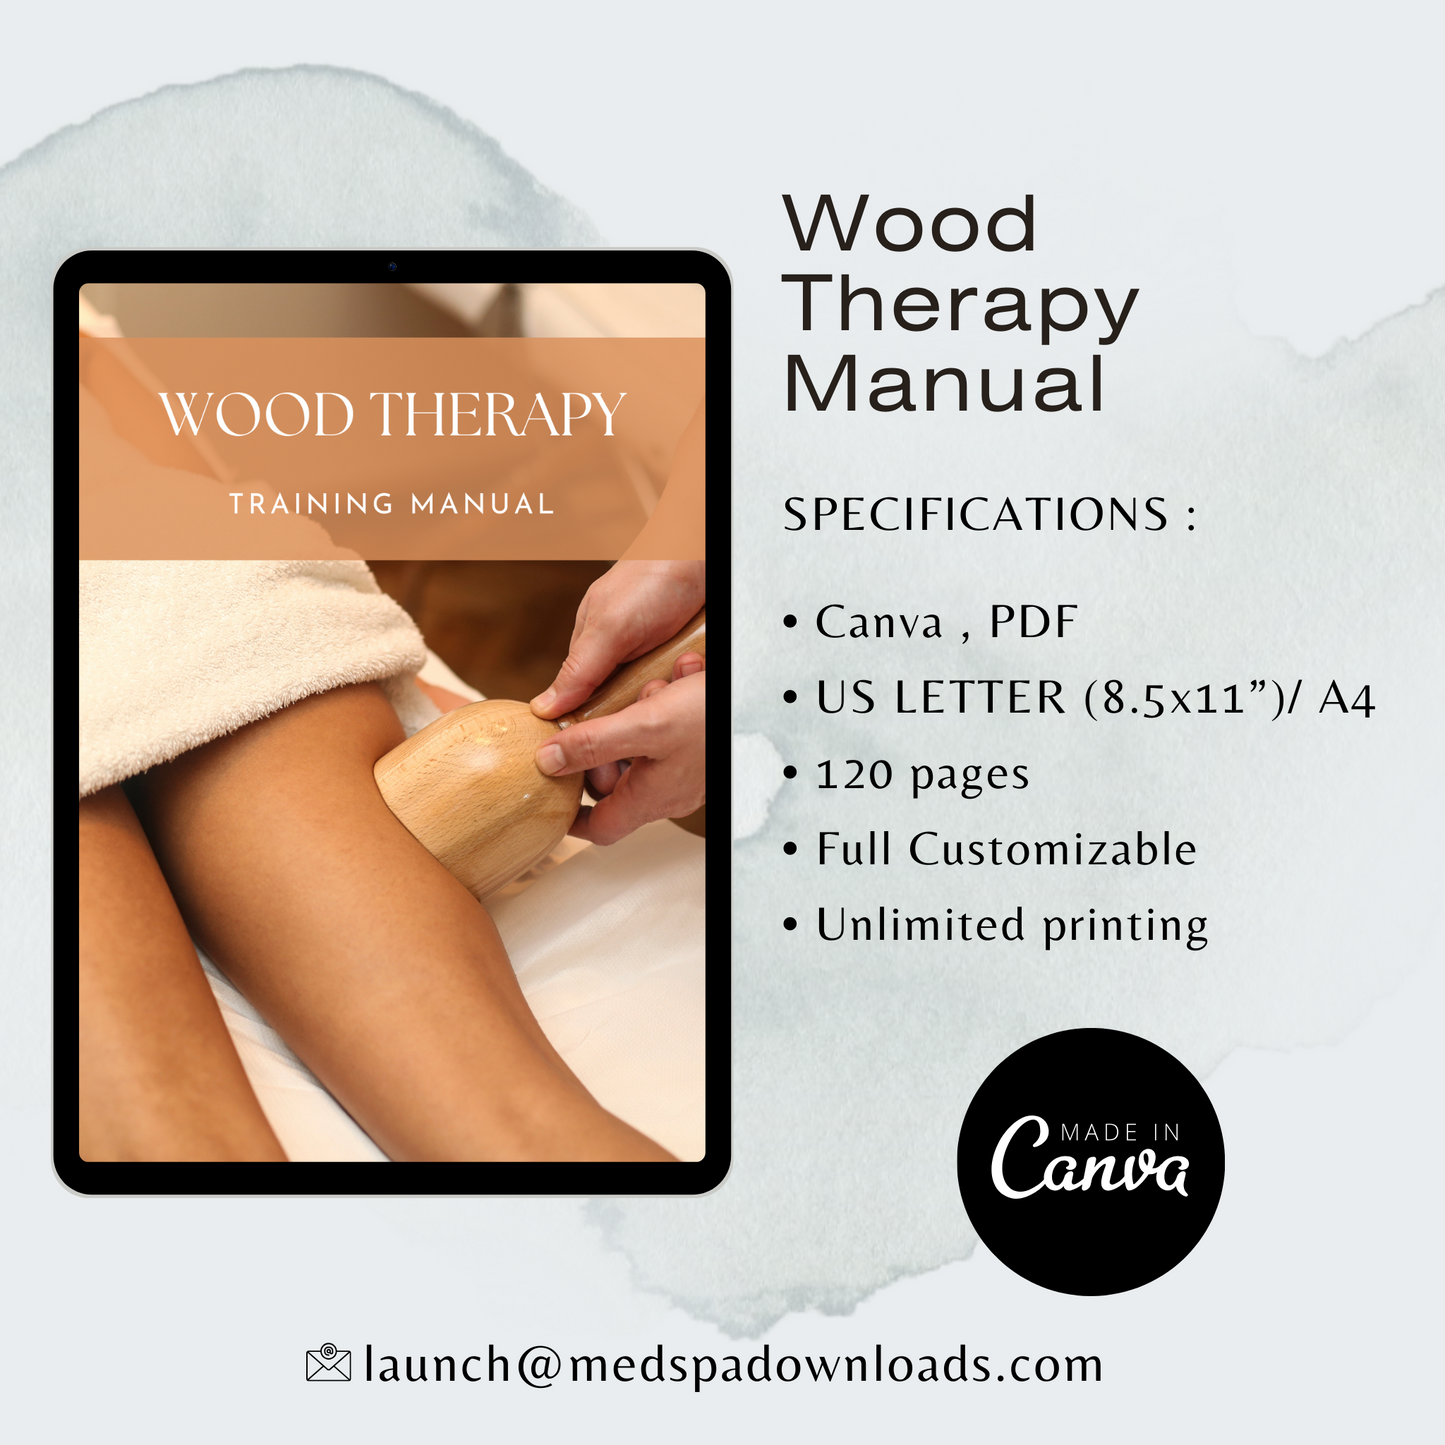 Wood Therapy Training Manual